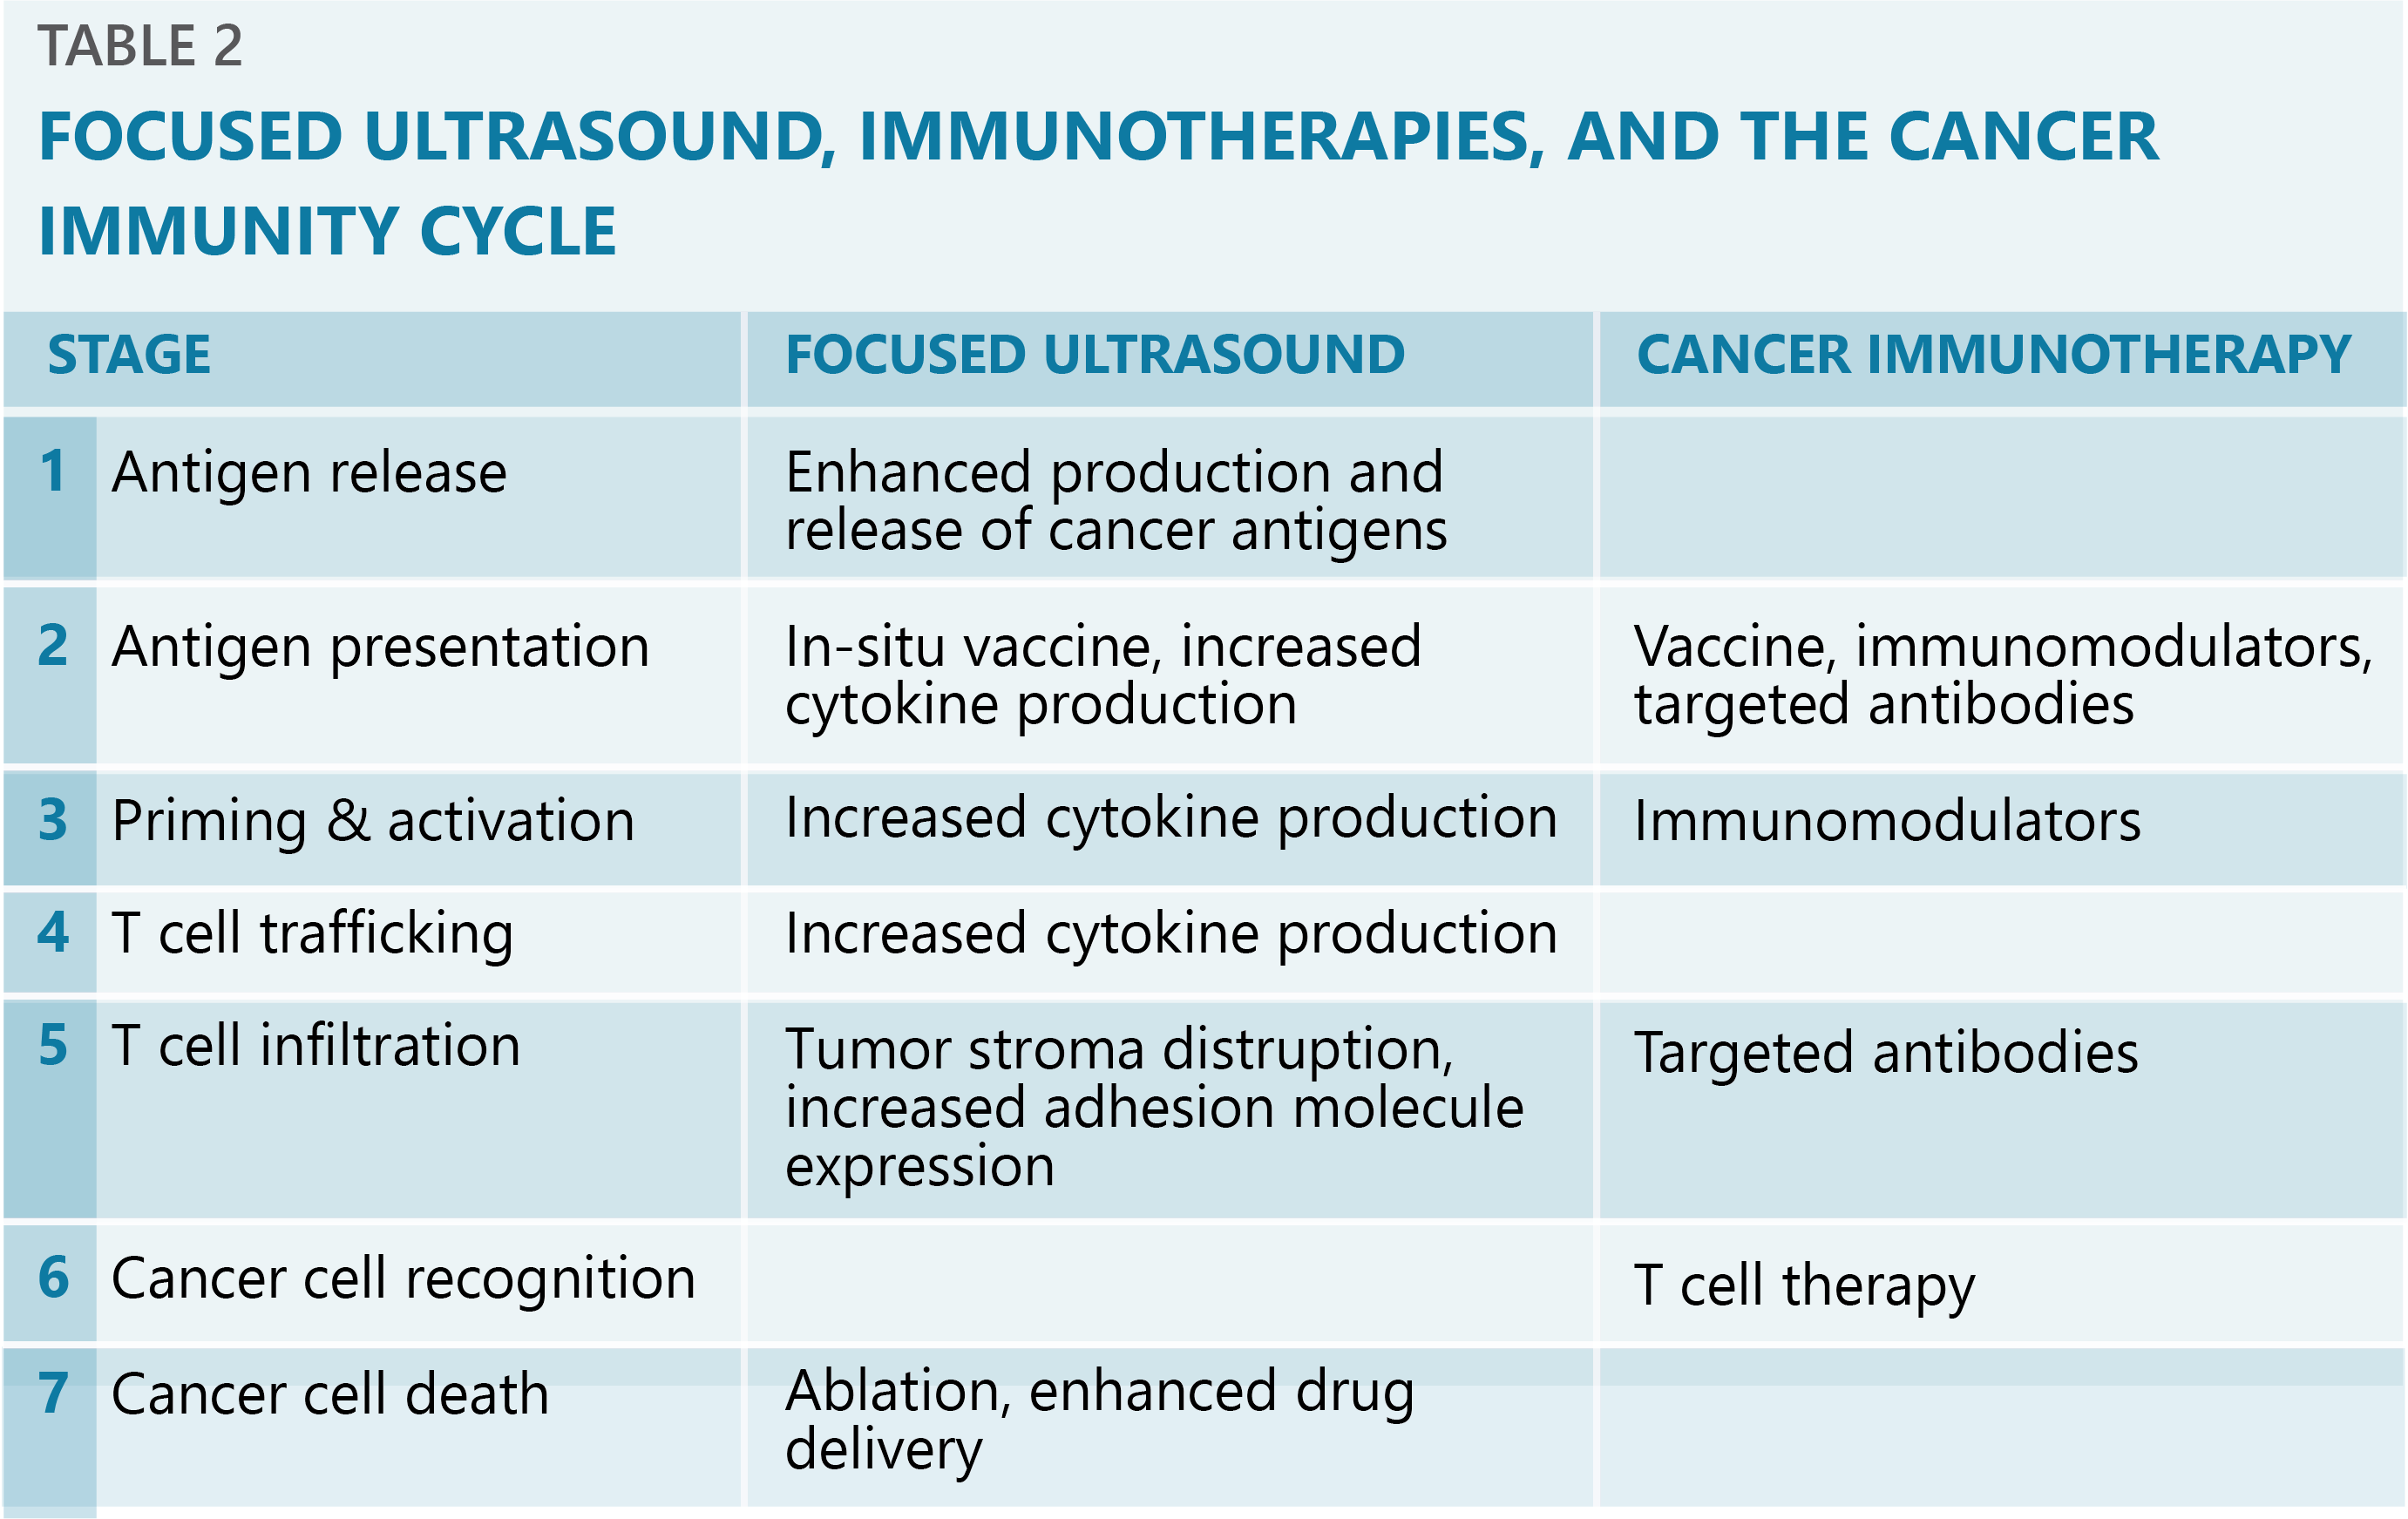 Cancer Immunotherapy FF Table 2 June 2020